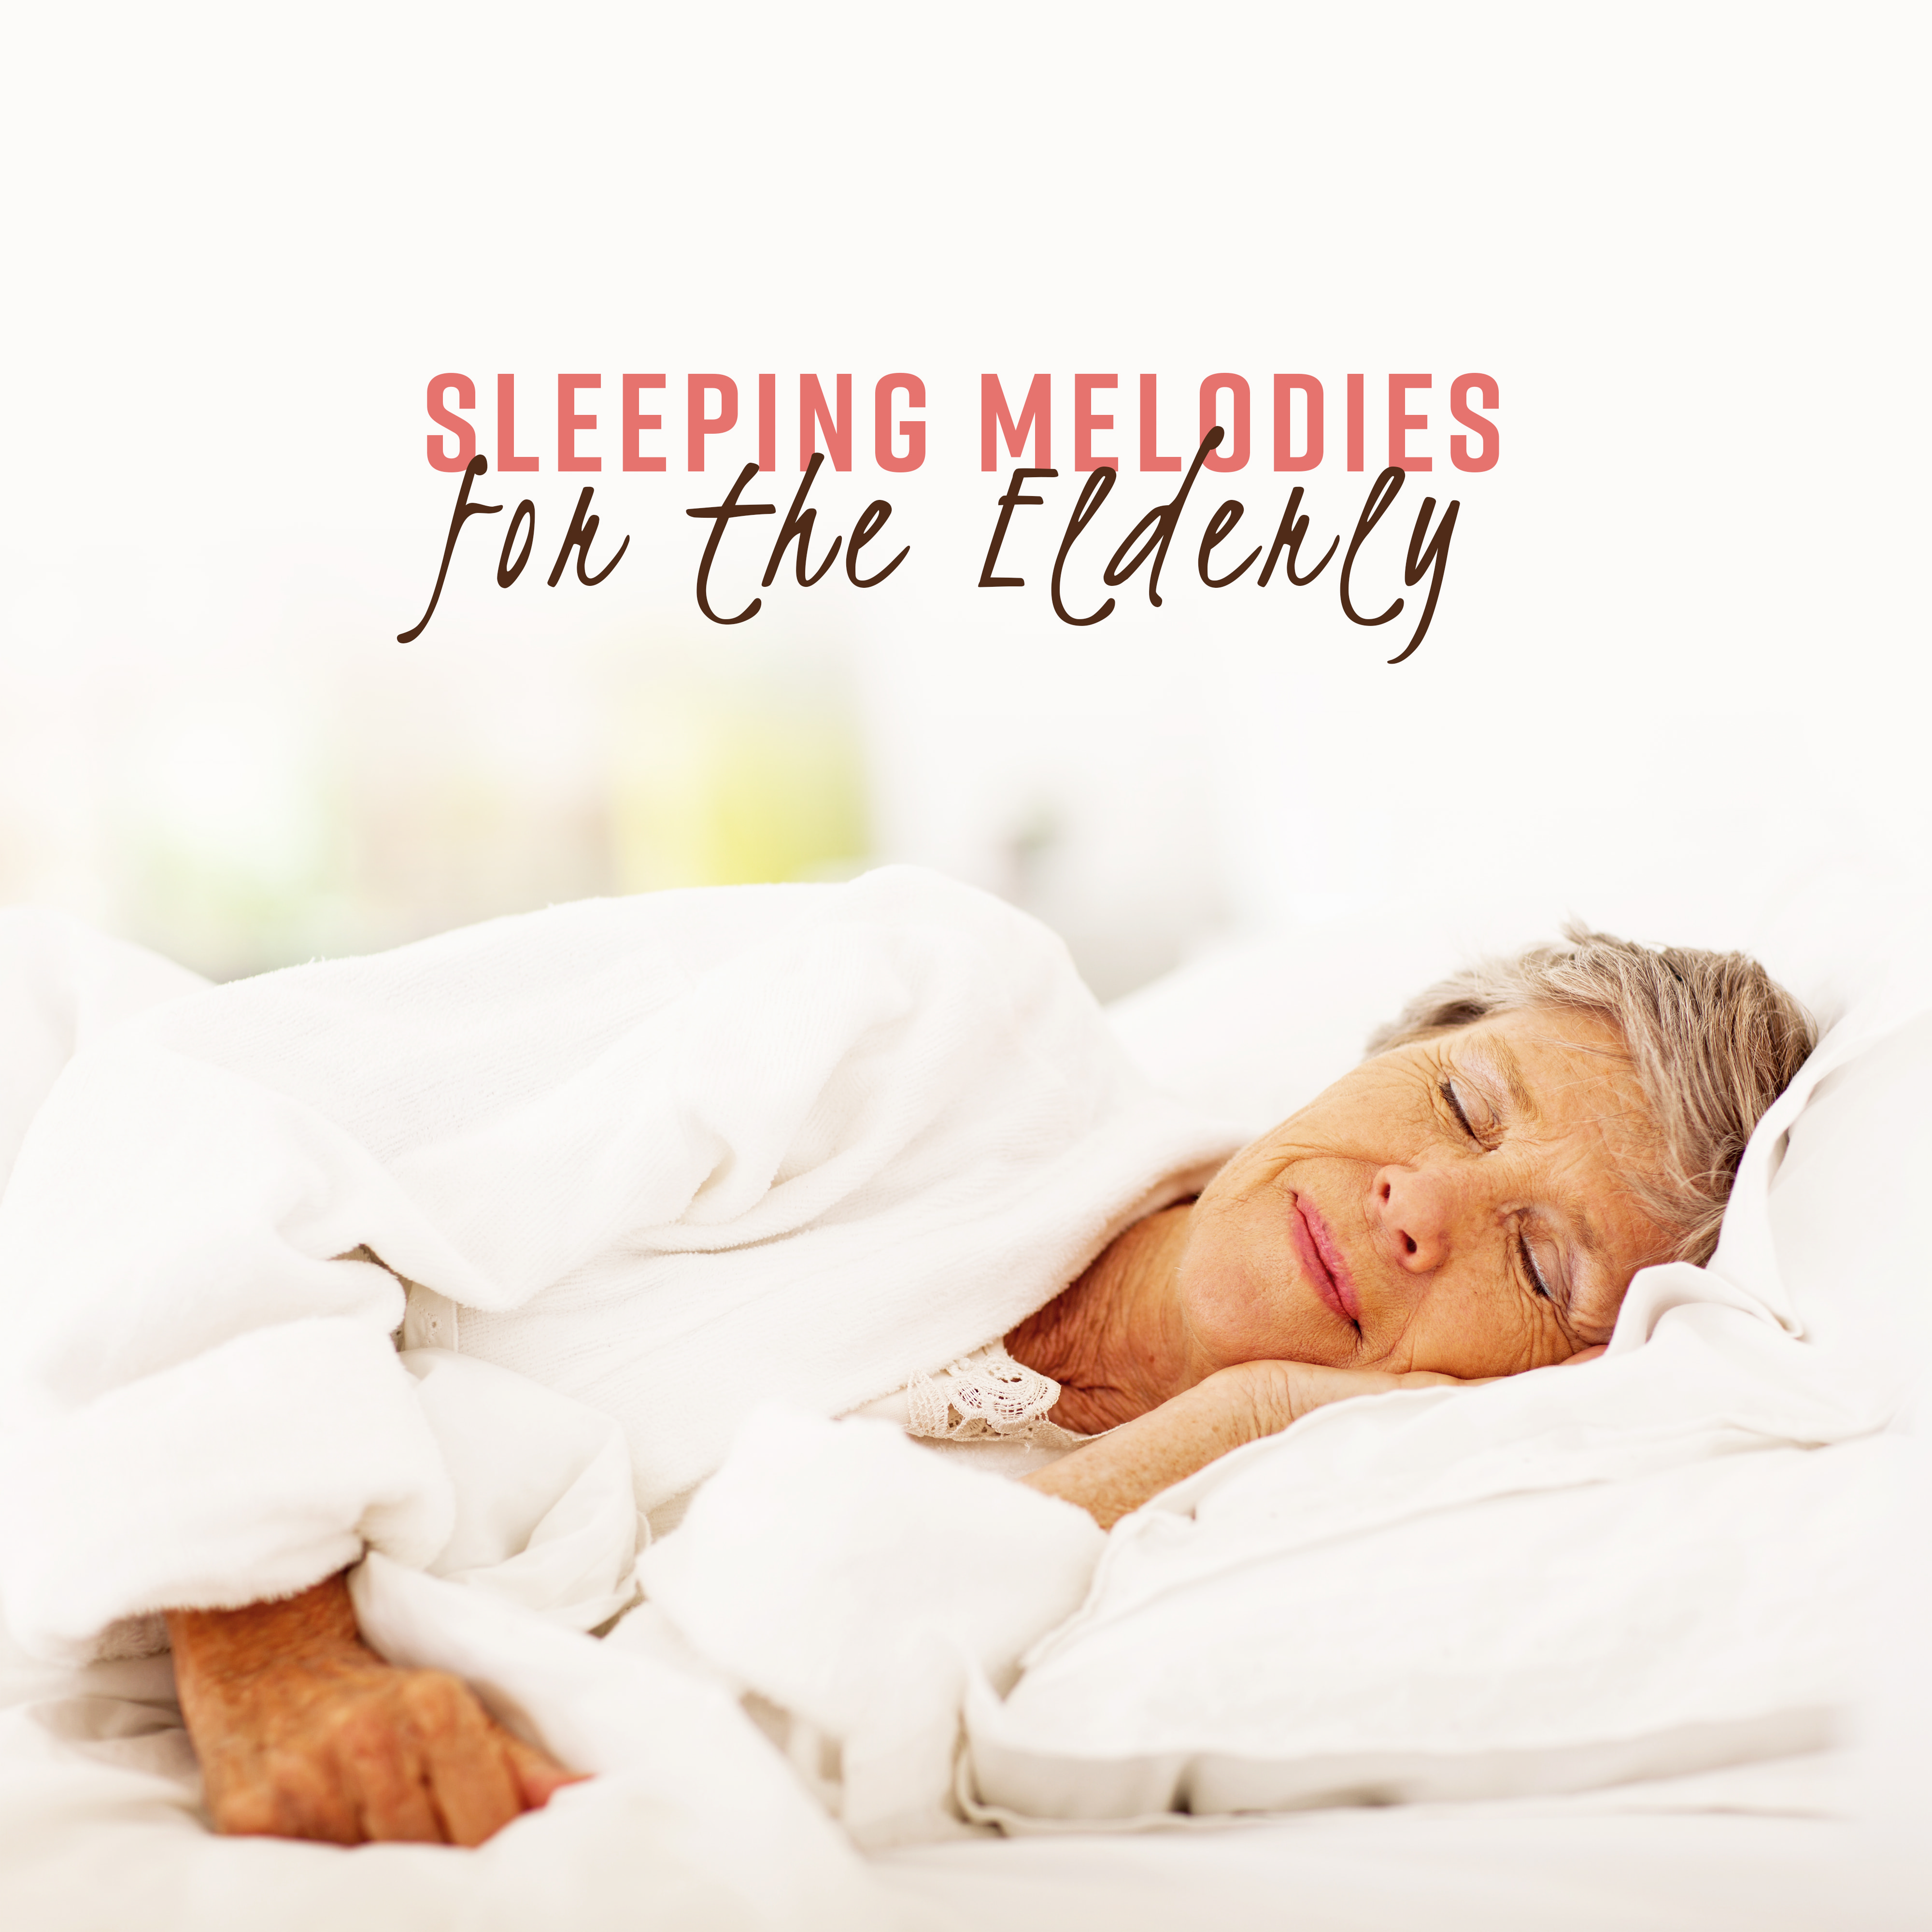 Sleeping Melodies for the Elderly